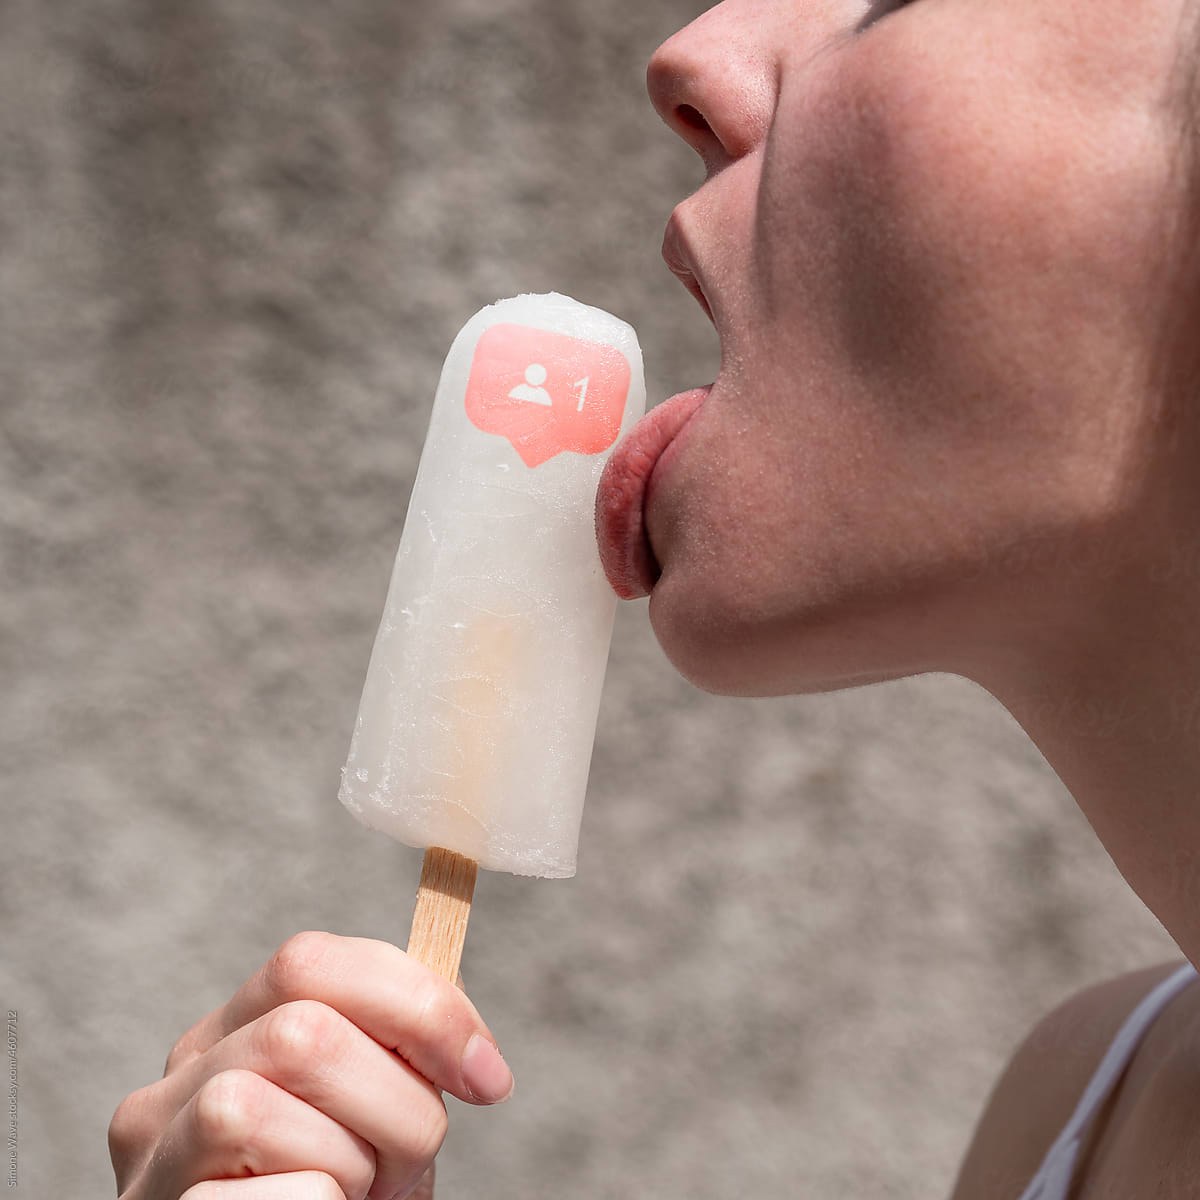 Woman licks ice lolly with followers icon